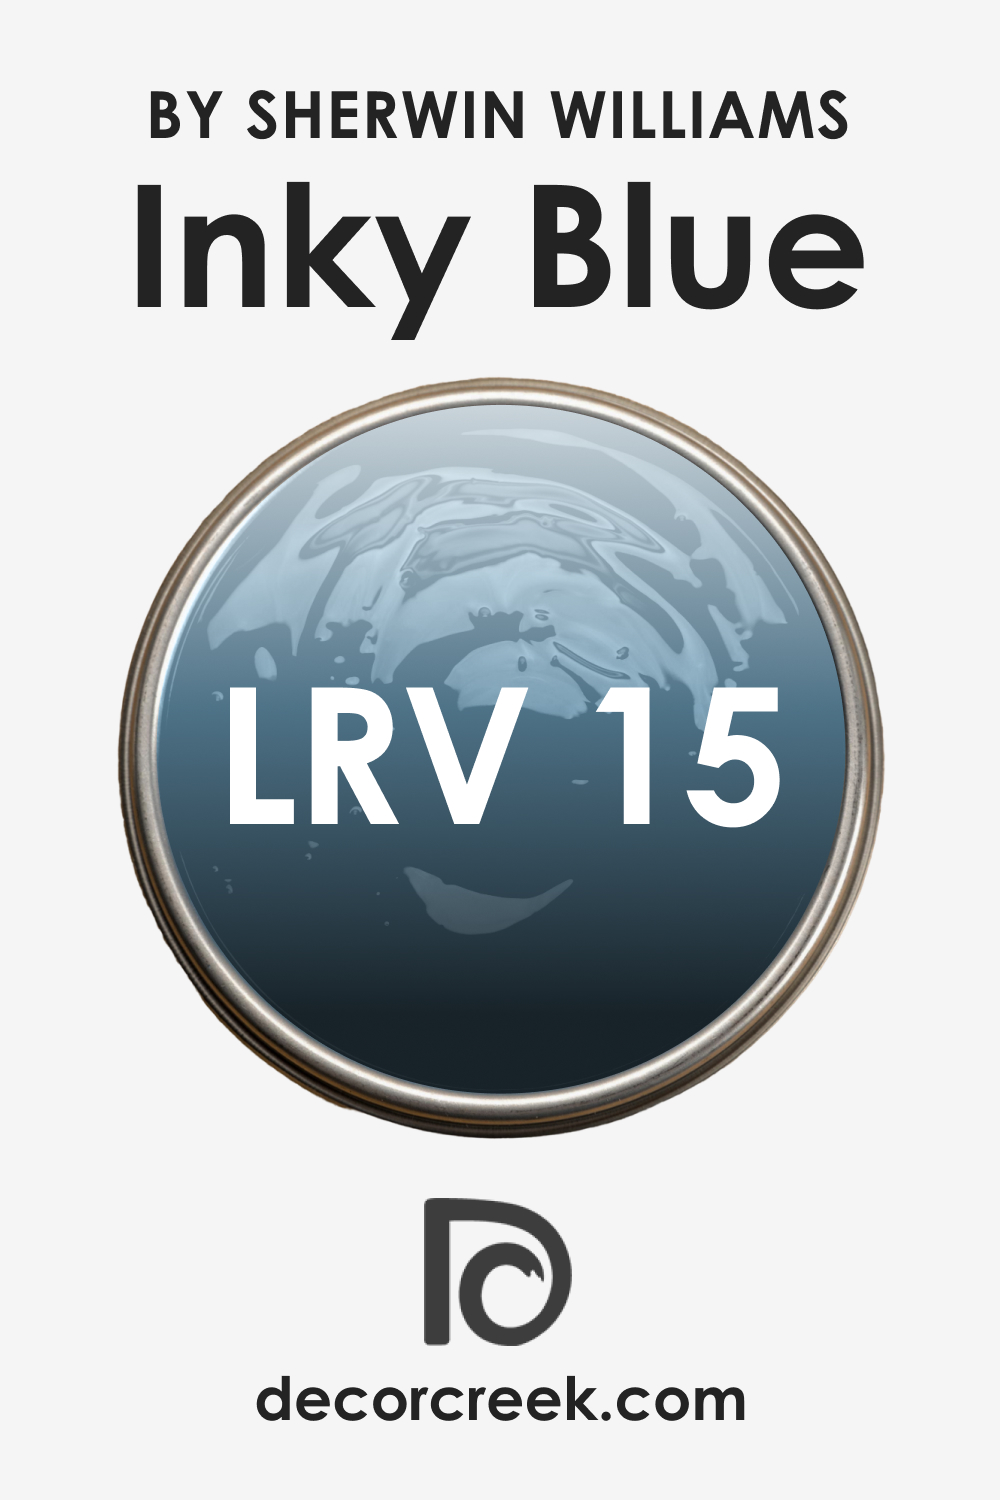 What LRV Does SW Inky Blue Paint Color Have?